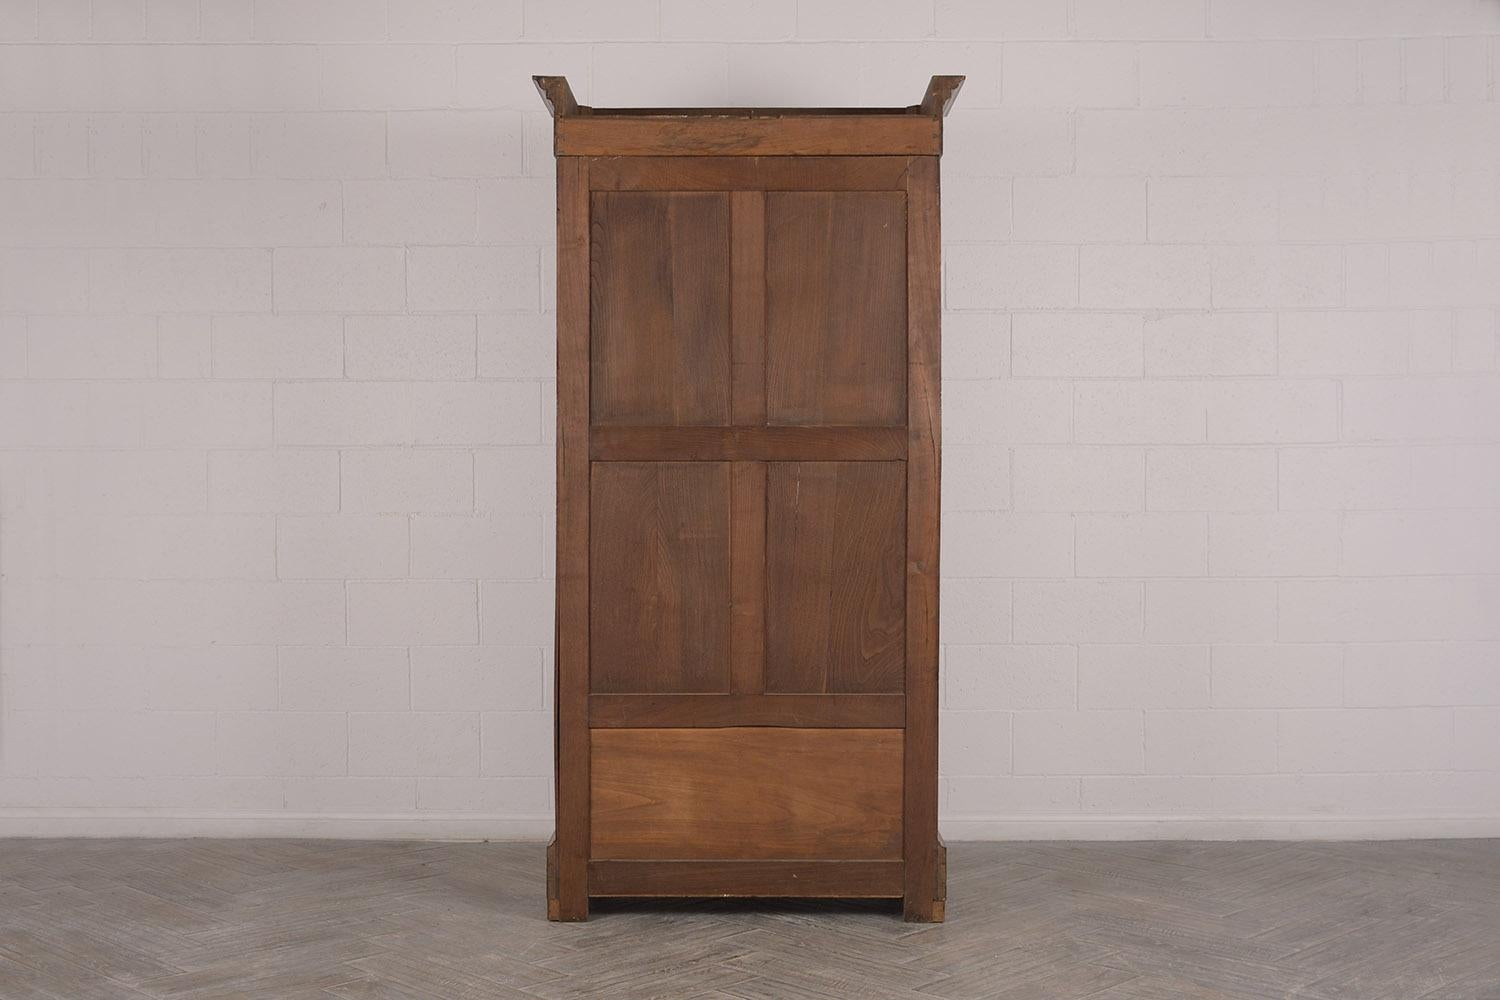 This 1890s single door bookcase is ready for any office or home space. Made from solid walnut wood, with a bevelled crown, single wood moulding frame and original clear glass door. Features four fully adjustable wood shelves, and one single drawer